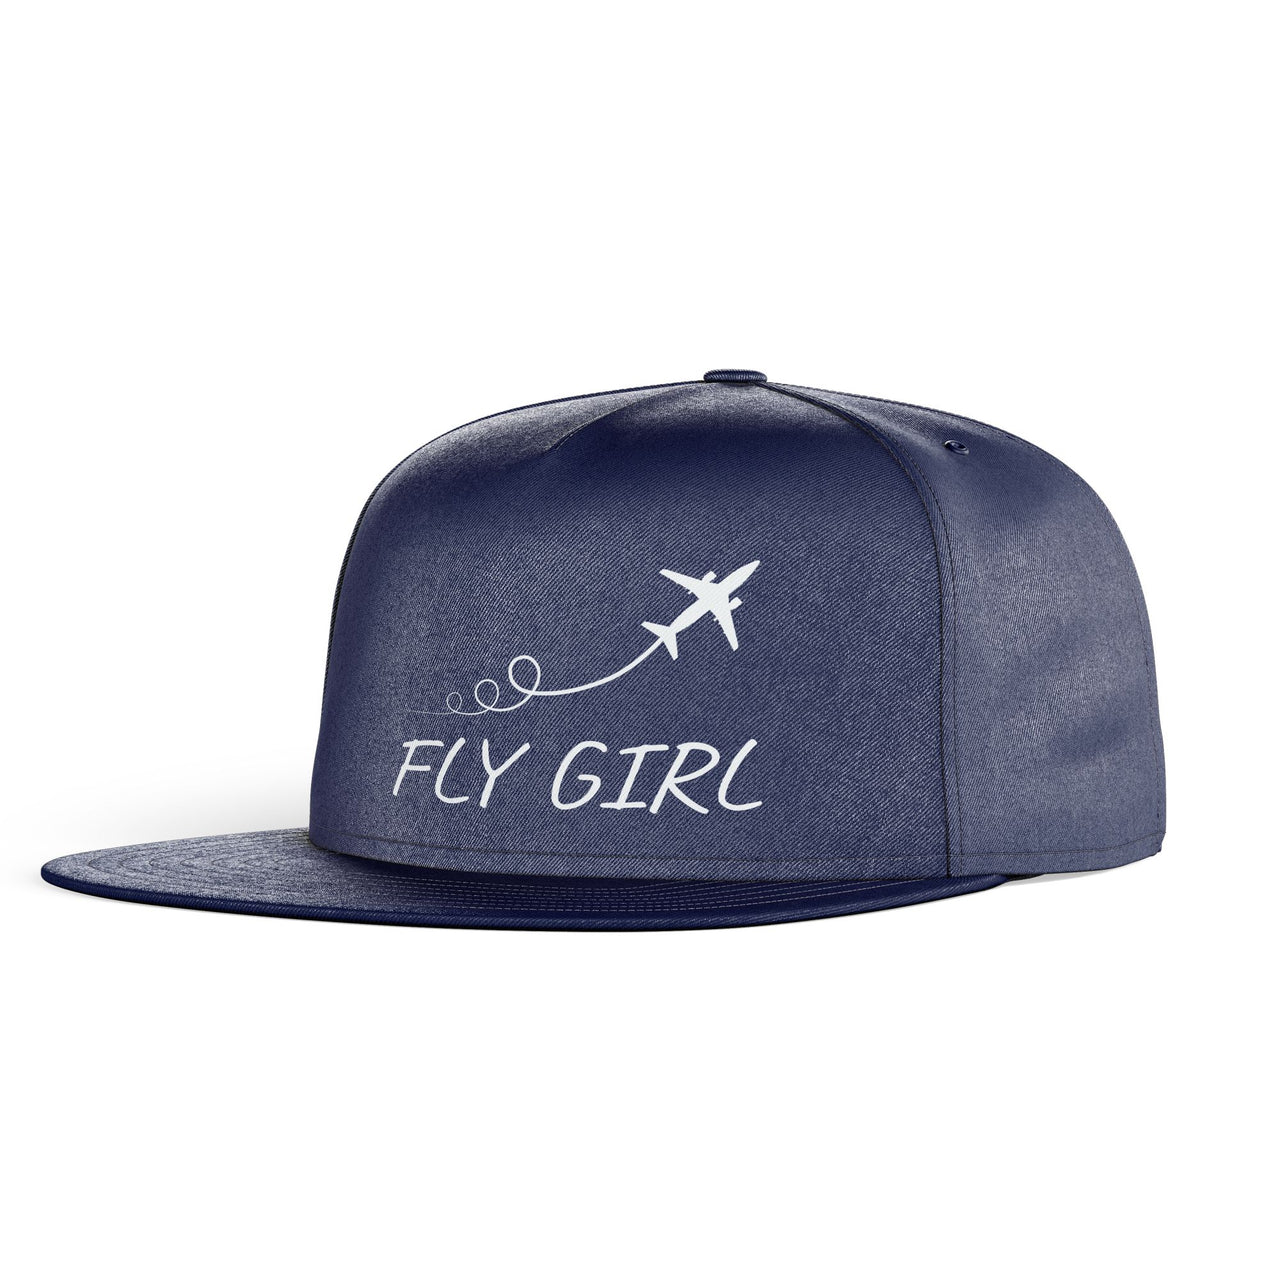 Just Fly It & Fly Girl Designed Snapback Caps & Hats